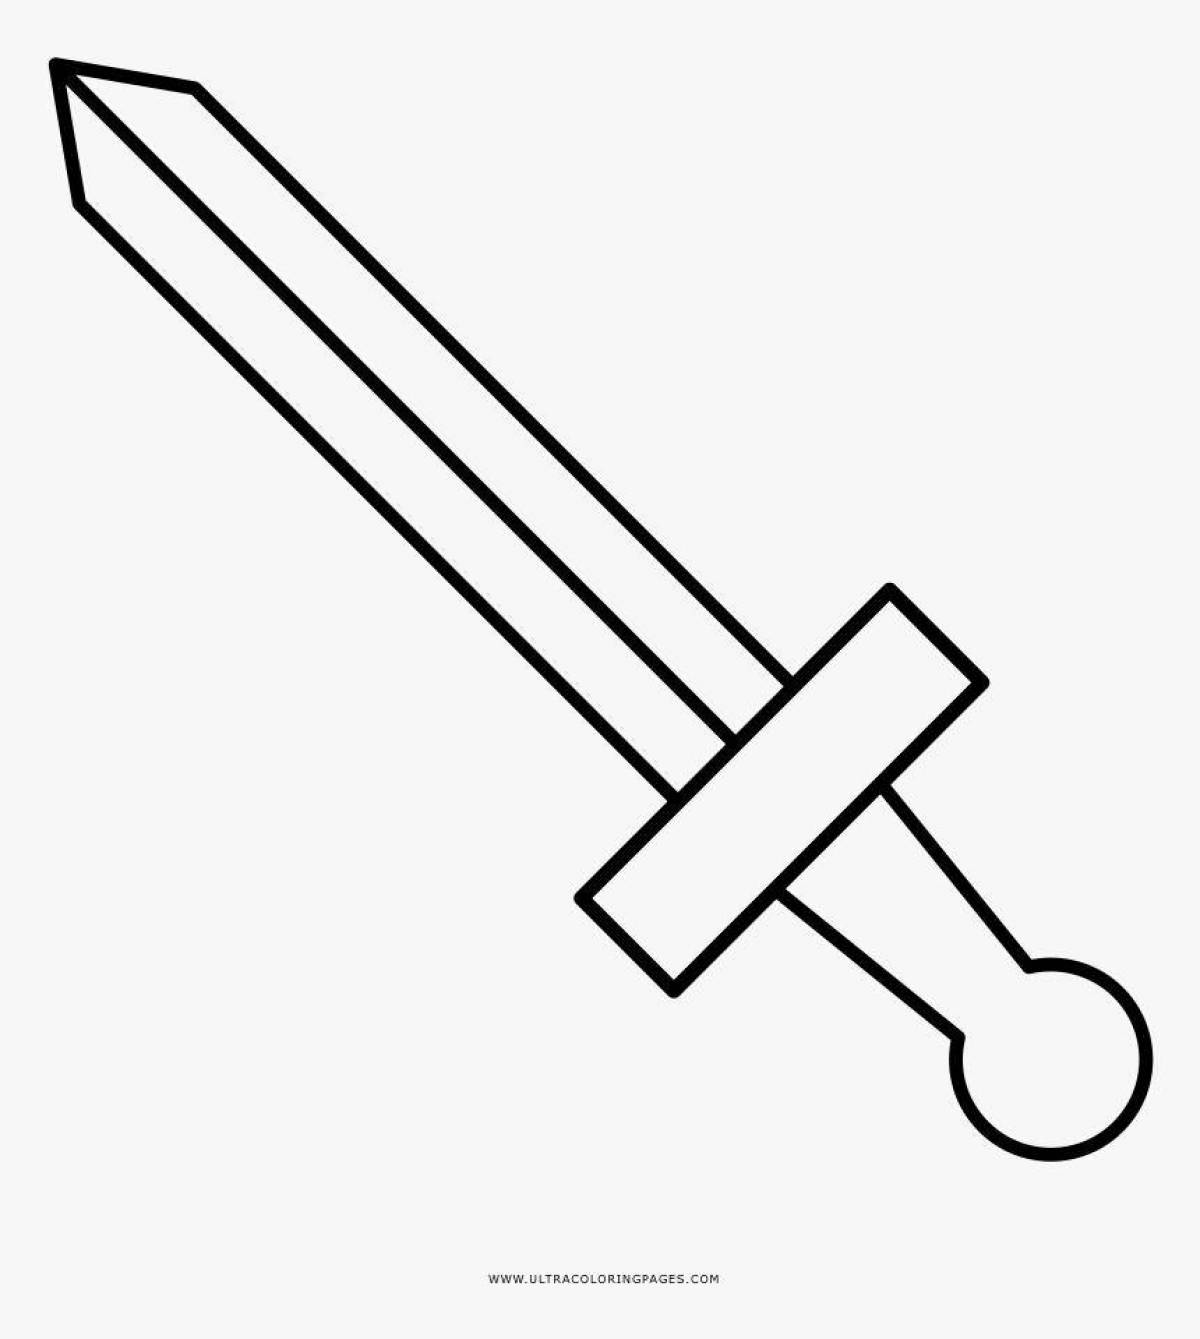 Attractive sword coloring page for kids